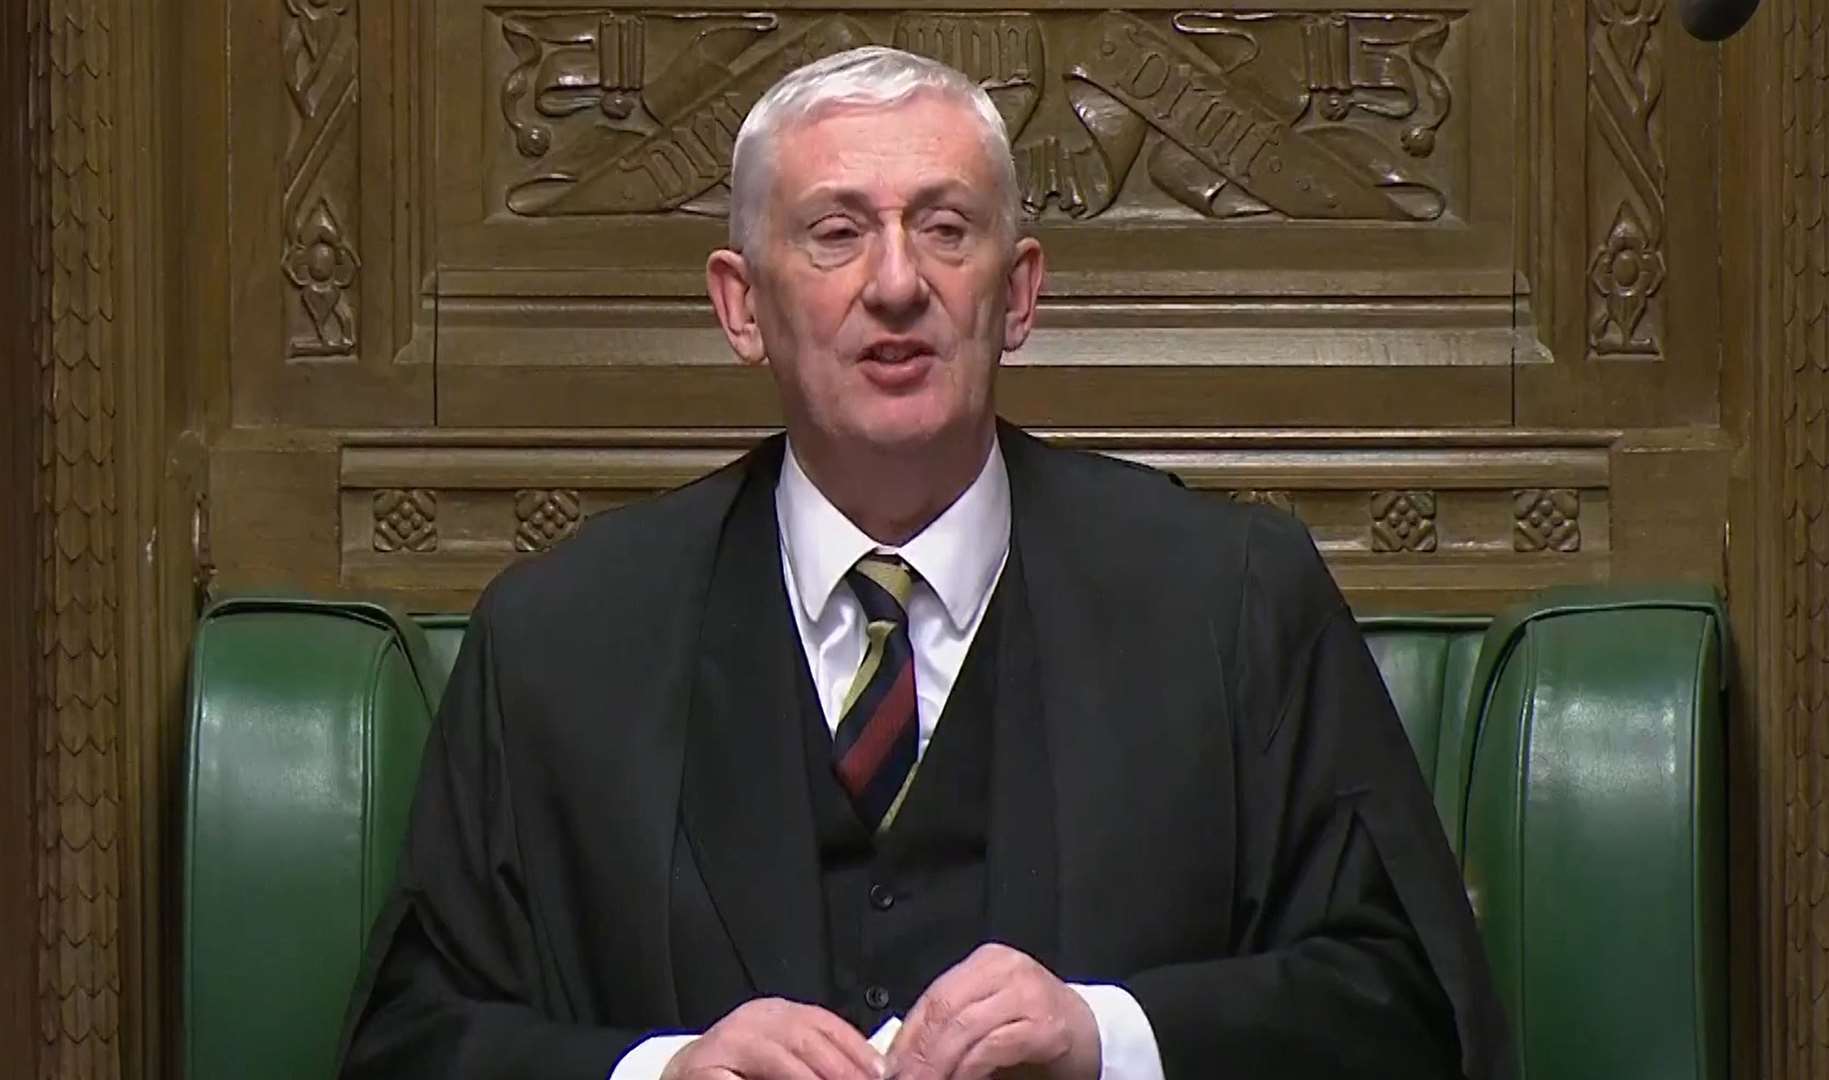 Commons Speaker Sir Lindsay Hoyle broke with parliamentary precedent over concerns he had about intimidation suffered by some MPs (House of Commons/UK Parliament/PA)